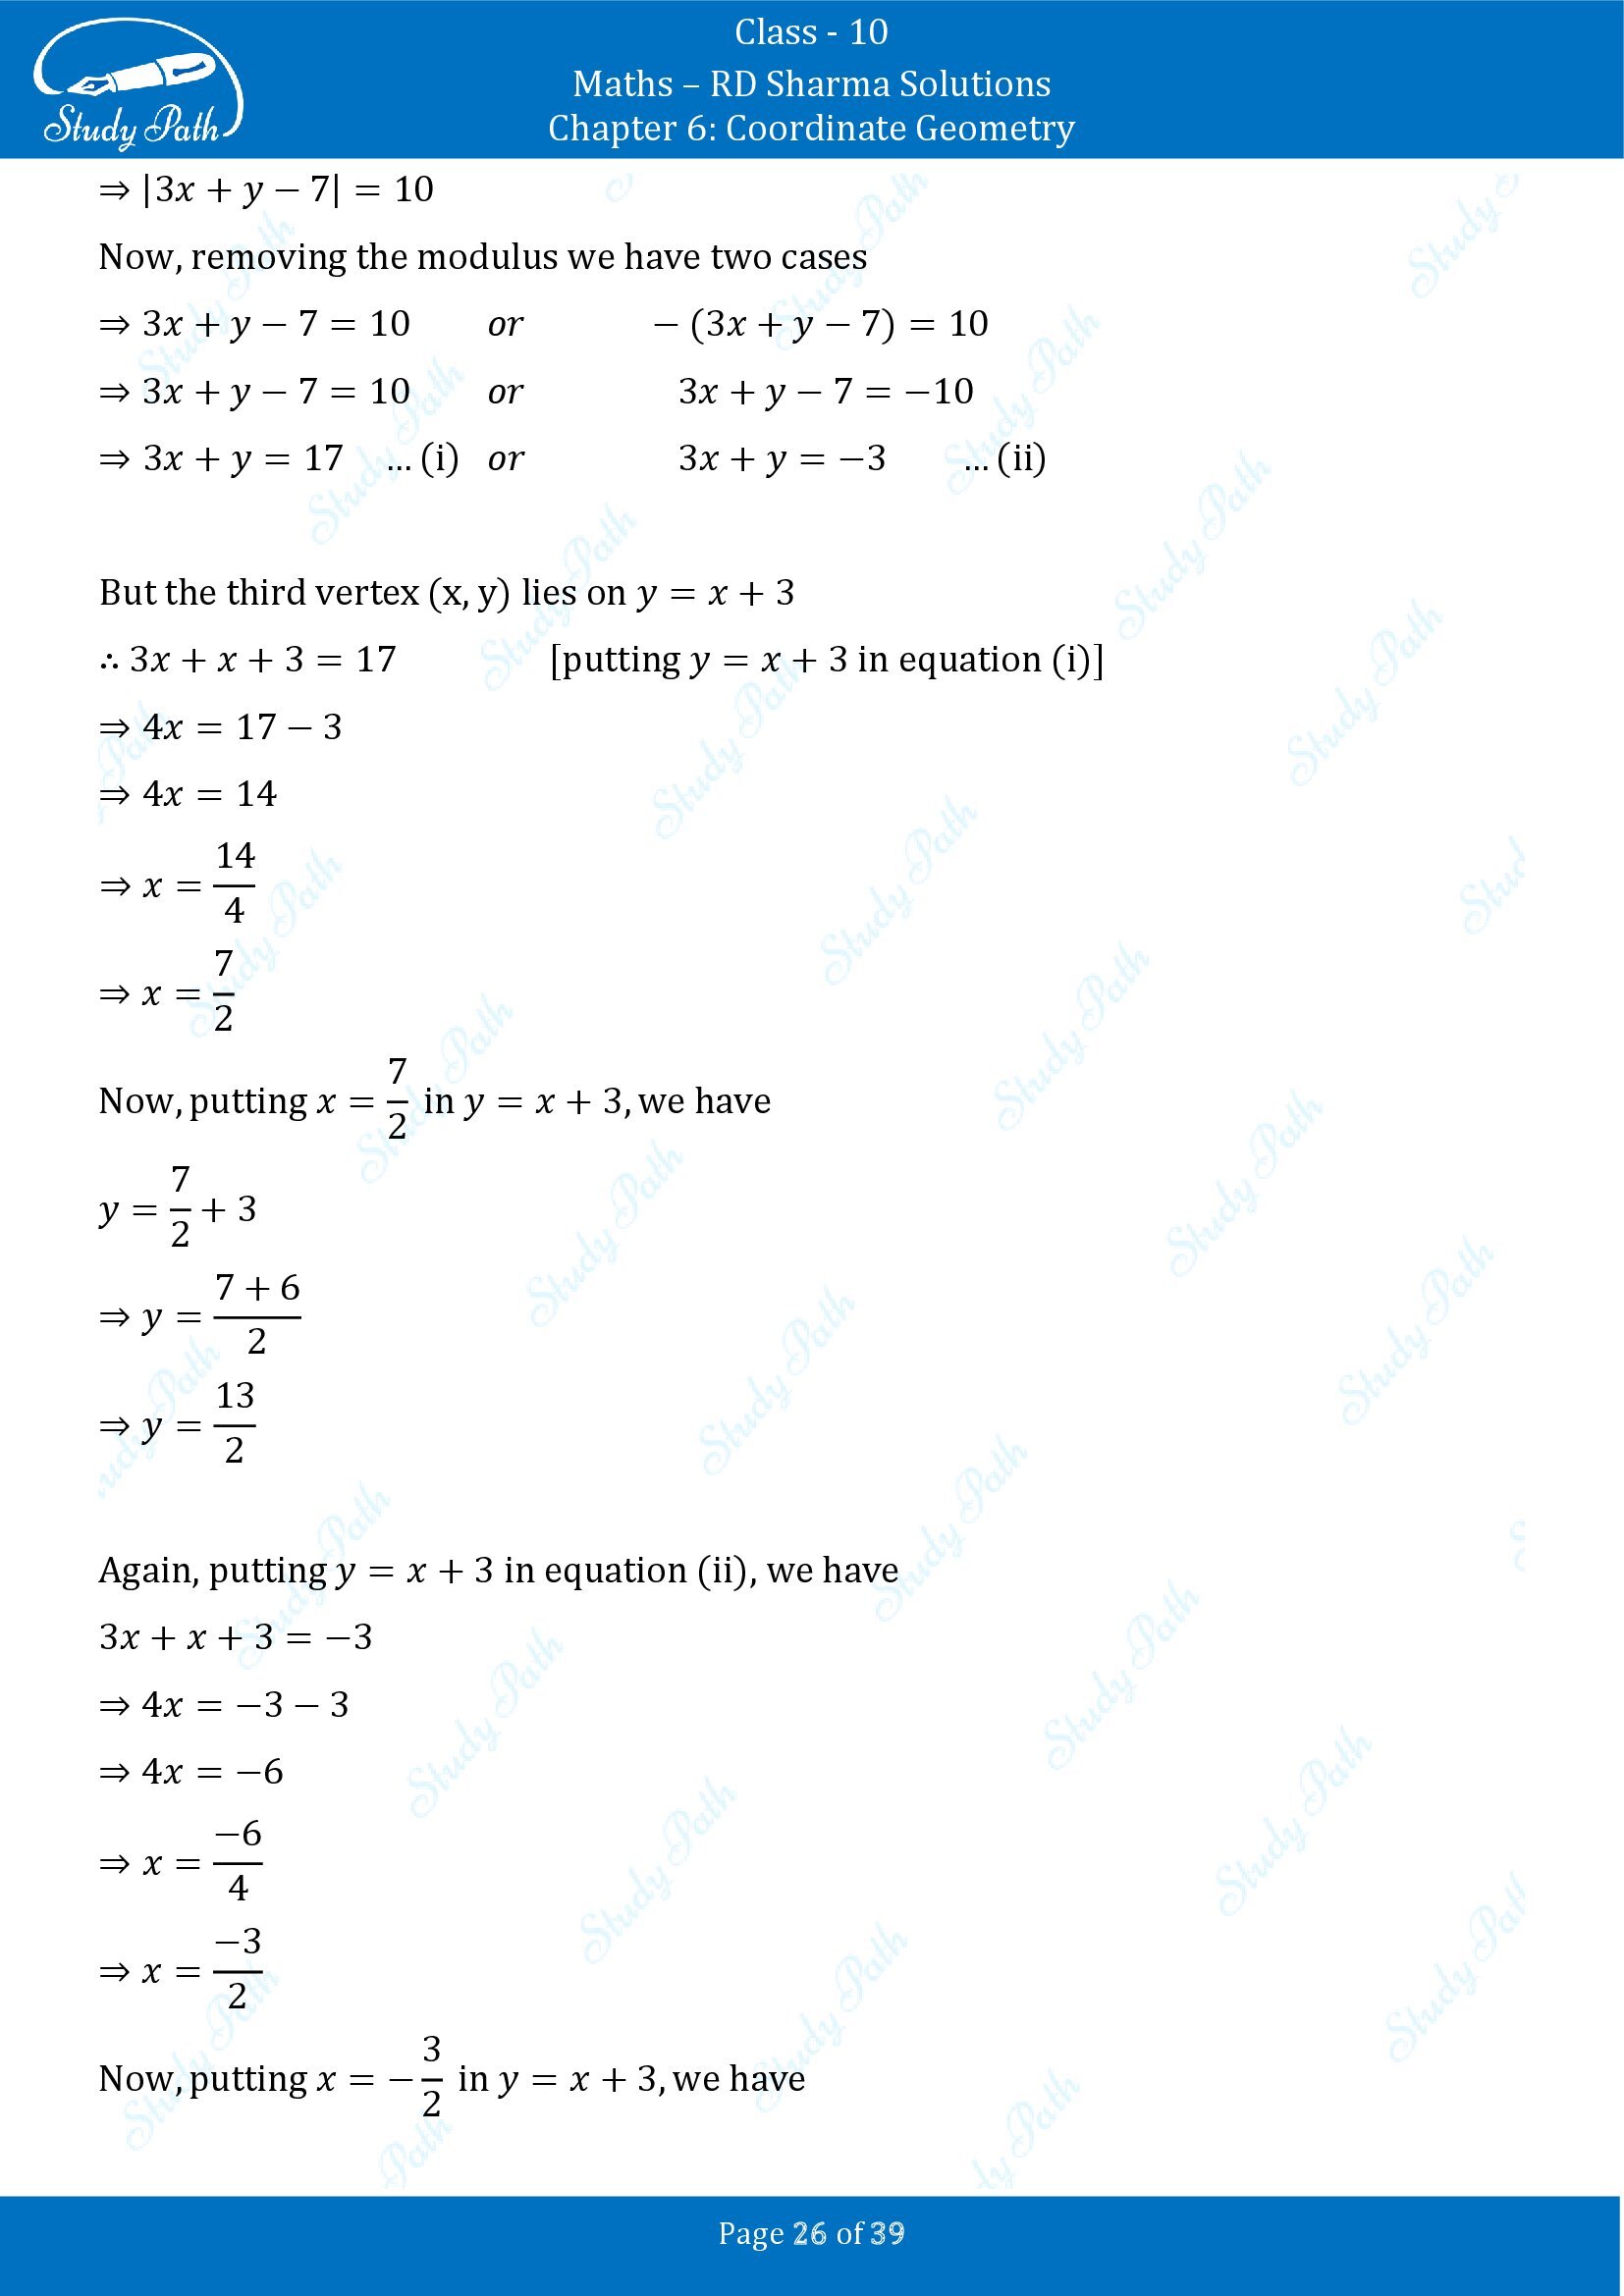 RD Sharma Solutions Class 10 Chapter 6 Coordinate Geometry Exercise 6.5 0026